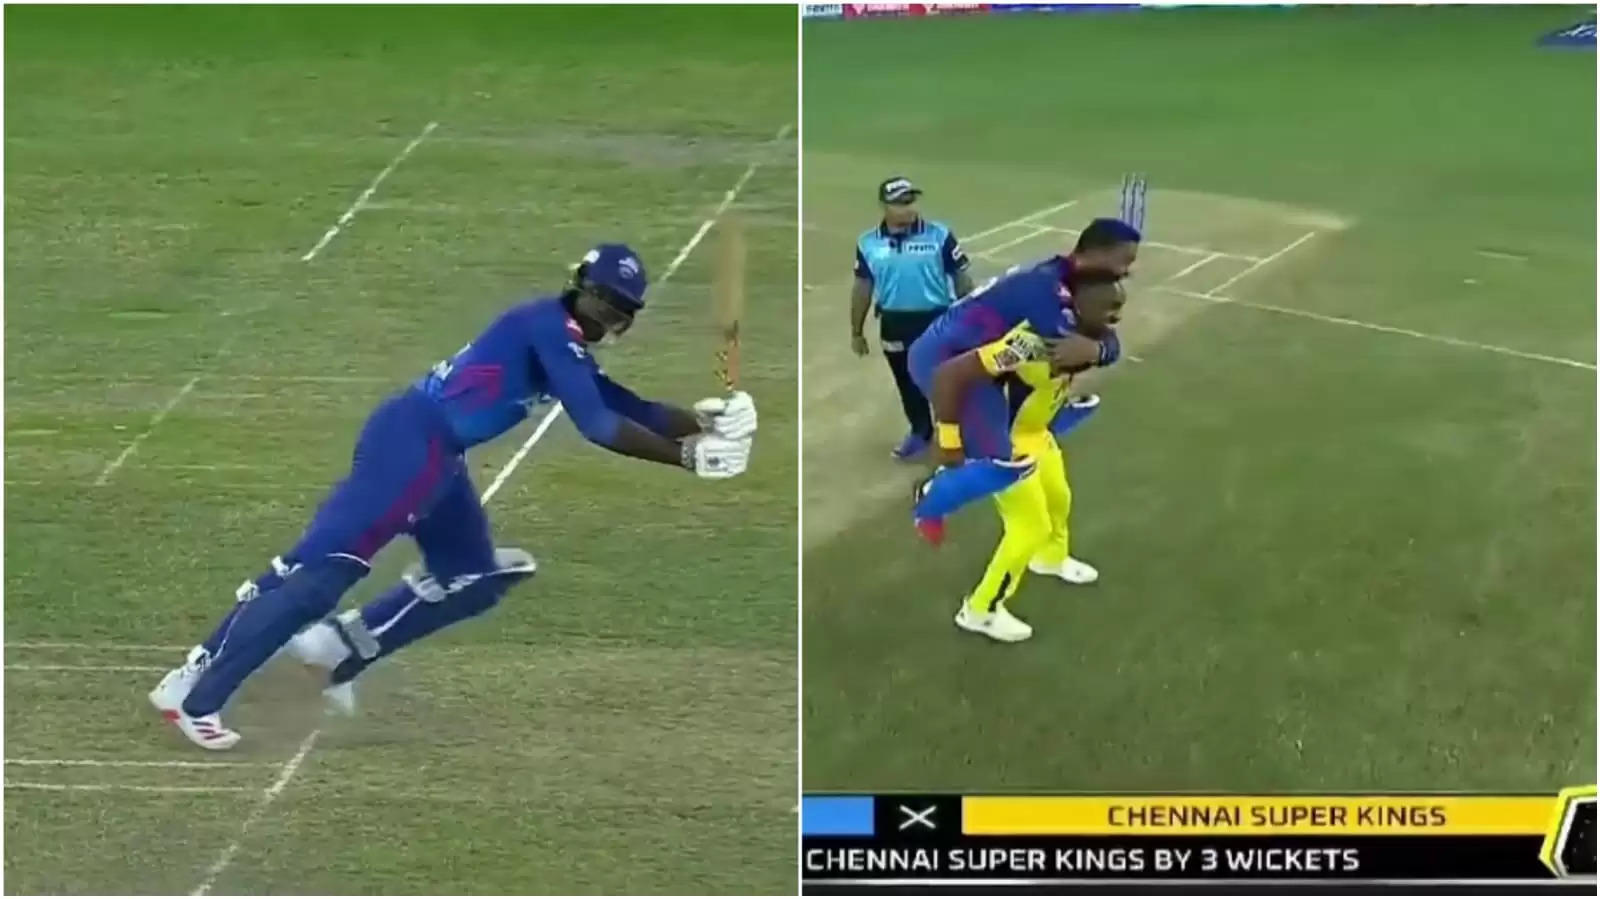 WATCH: Hetmyer bashes Bravo in game, pounces on his back like a cat after win